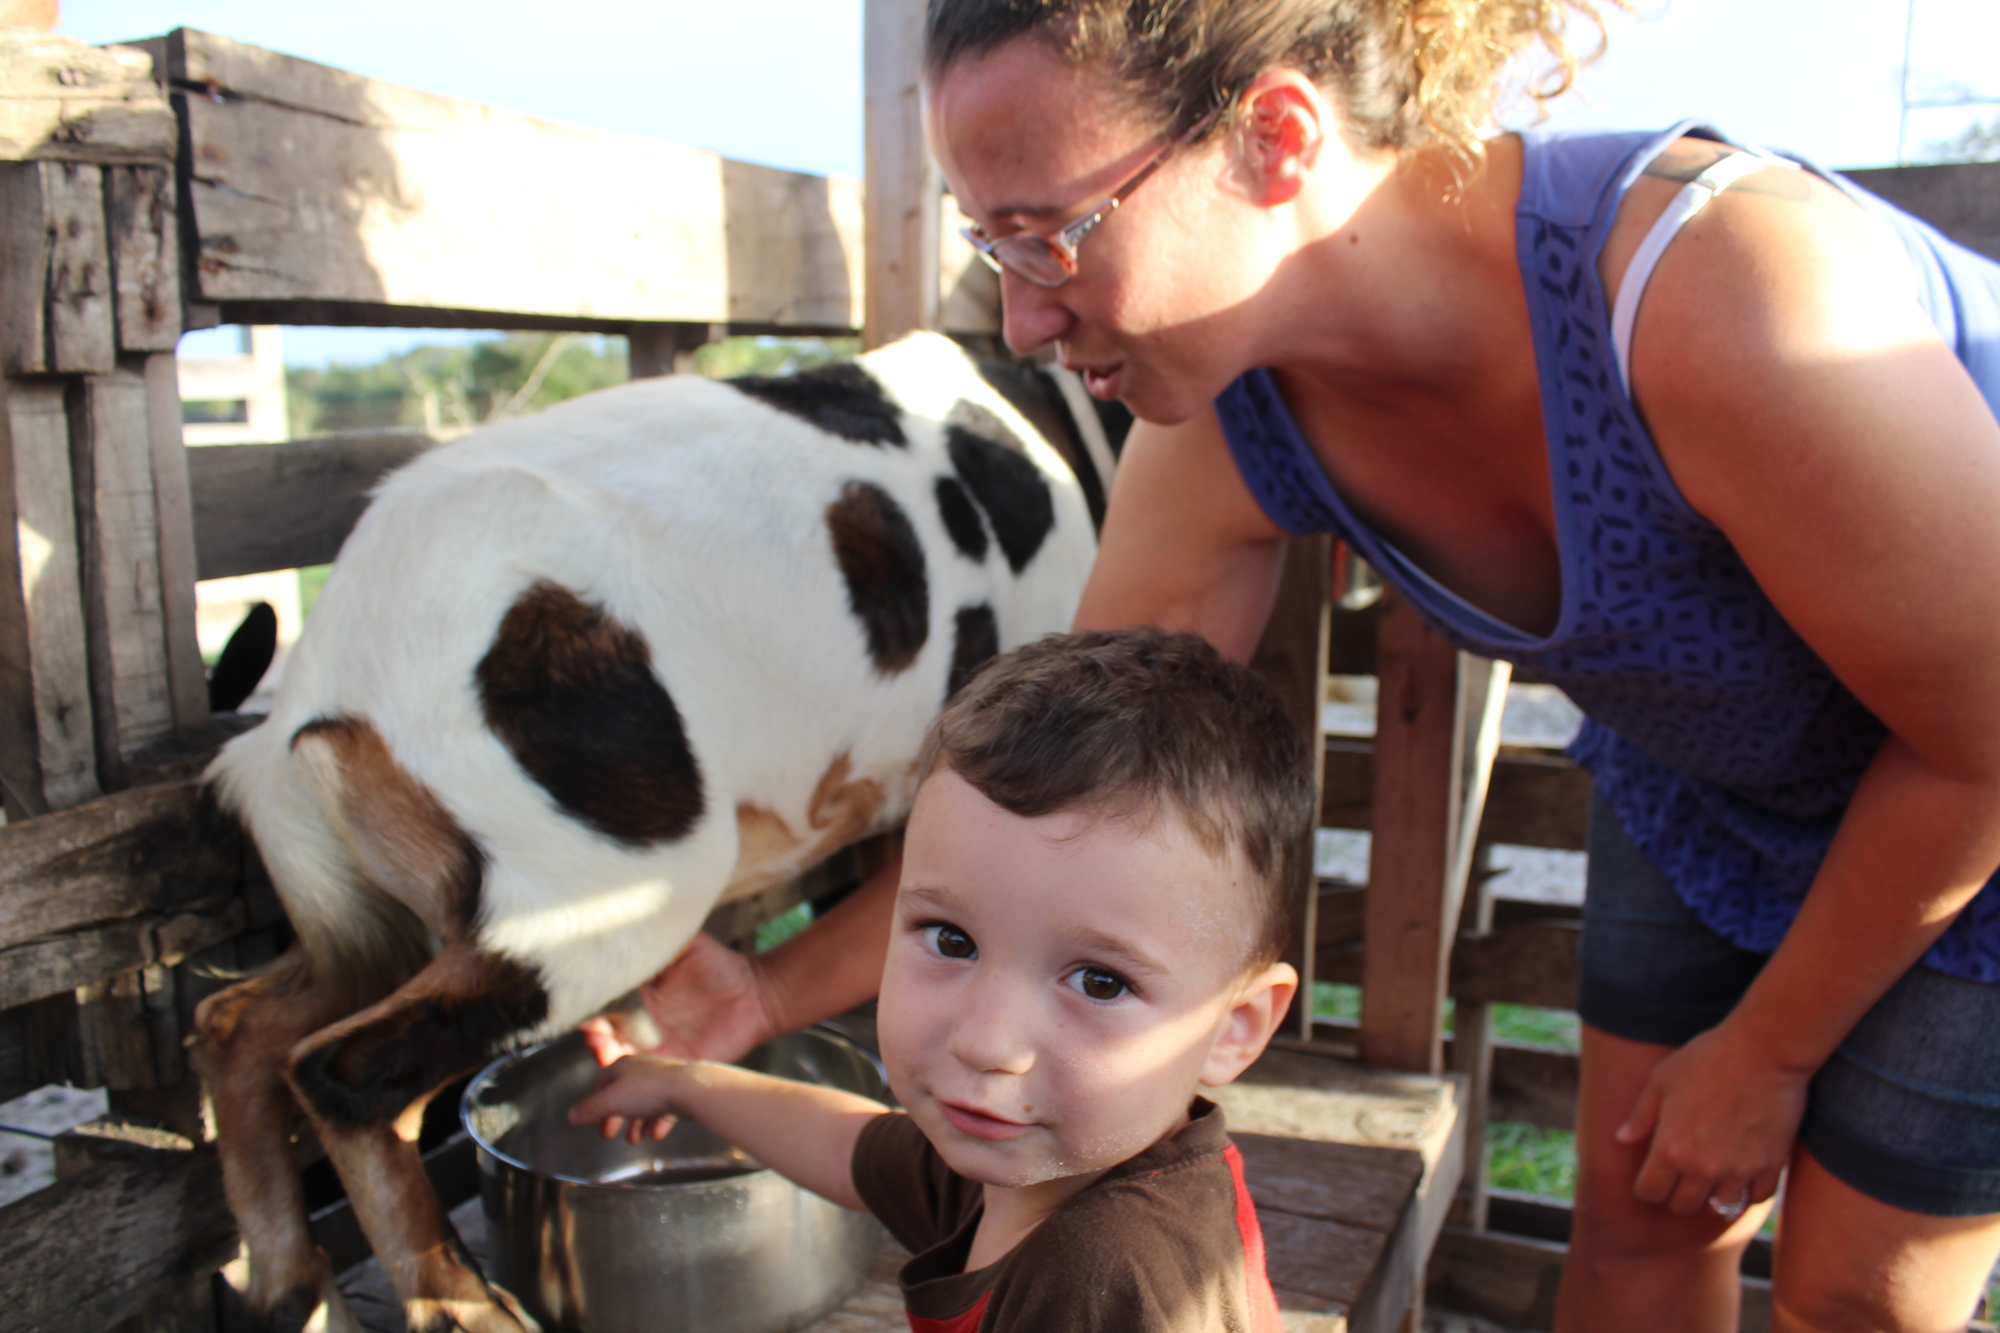 Joshua Smith and his mom, Morgan, spend time together milking Xena.